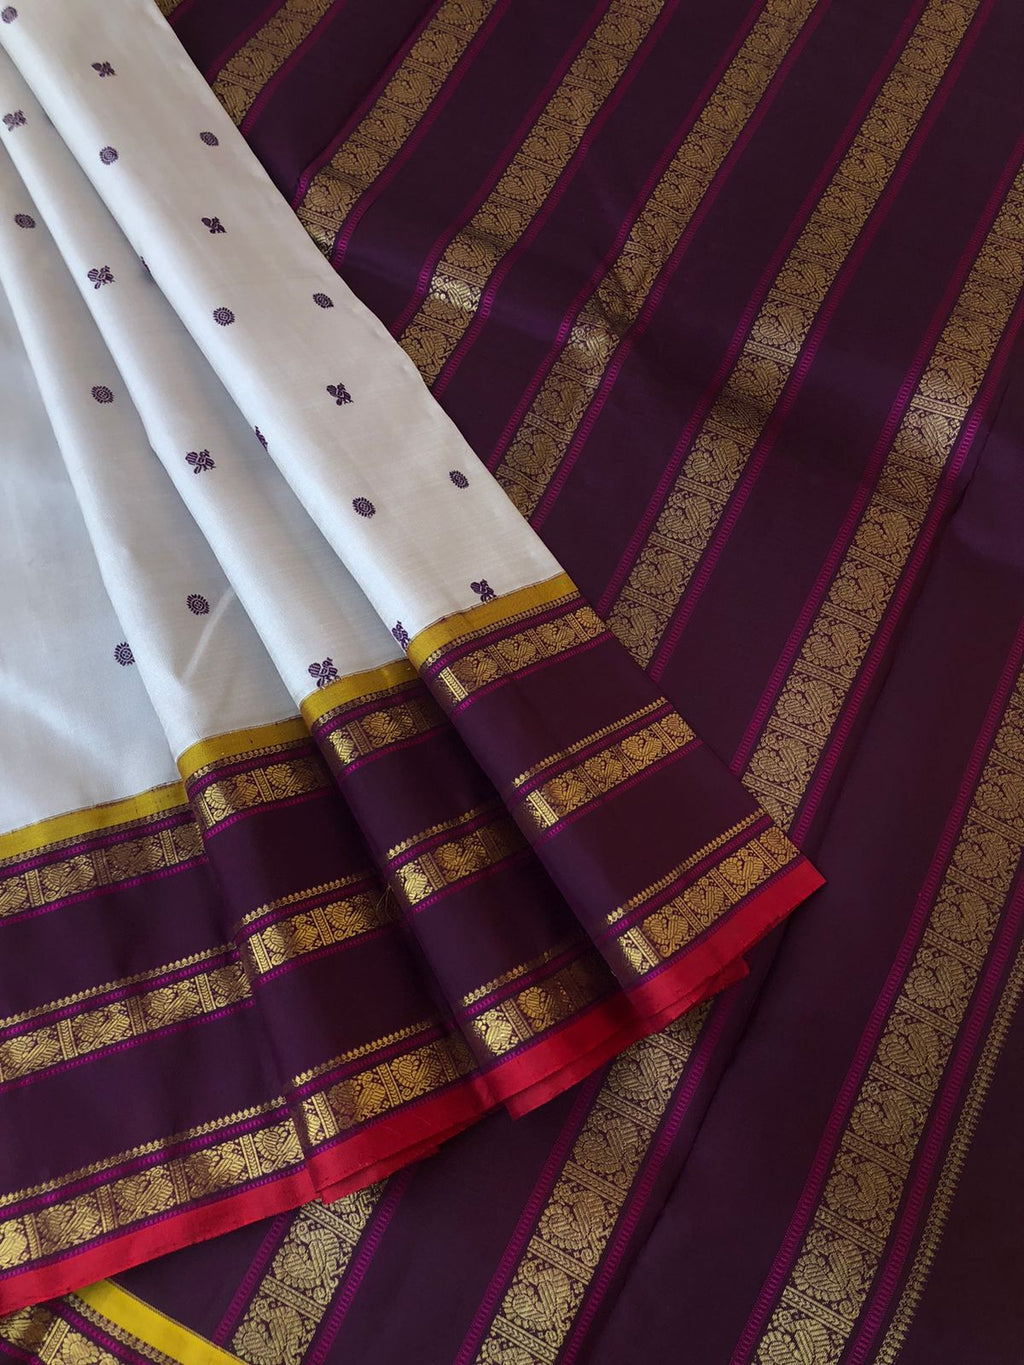 Meenakshi Kalayanam - Authentic Korvai Kanchivarams - stunning rare find pale calcium greyish off white with beetle nut tone borders pallu and blouse